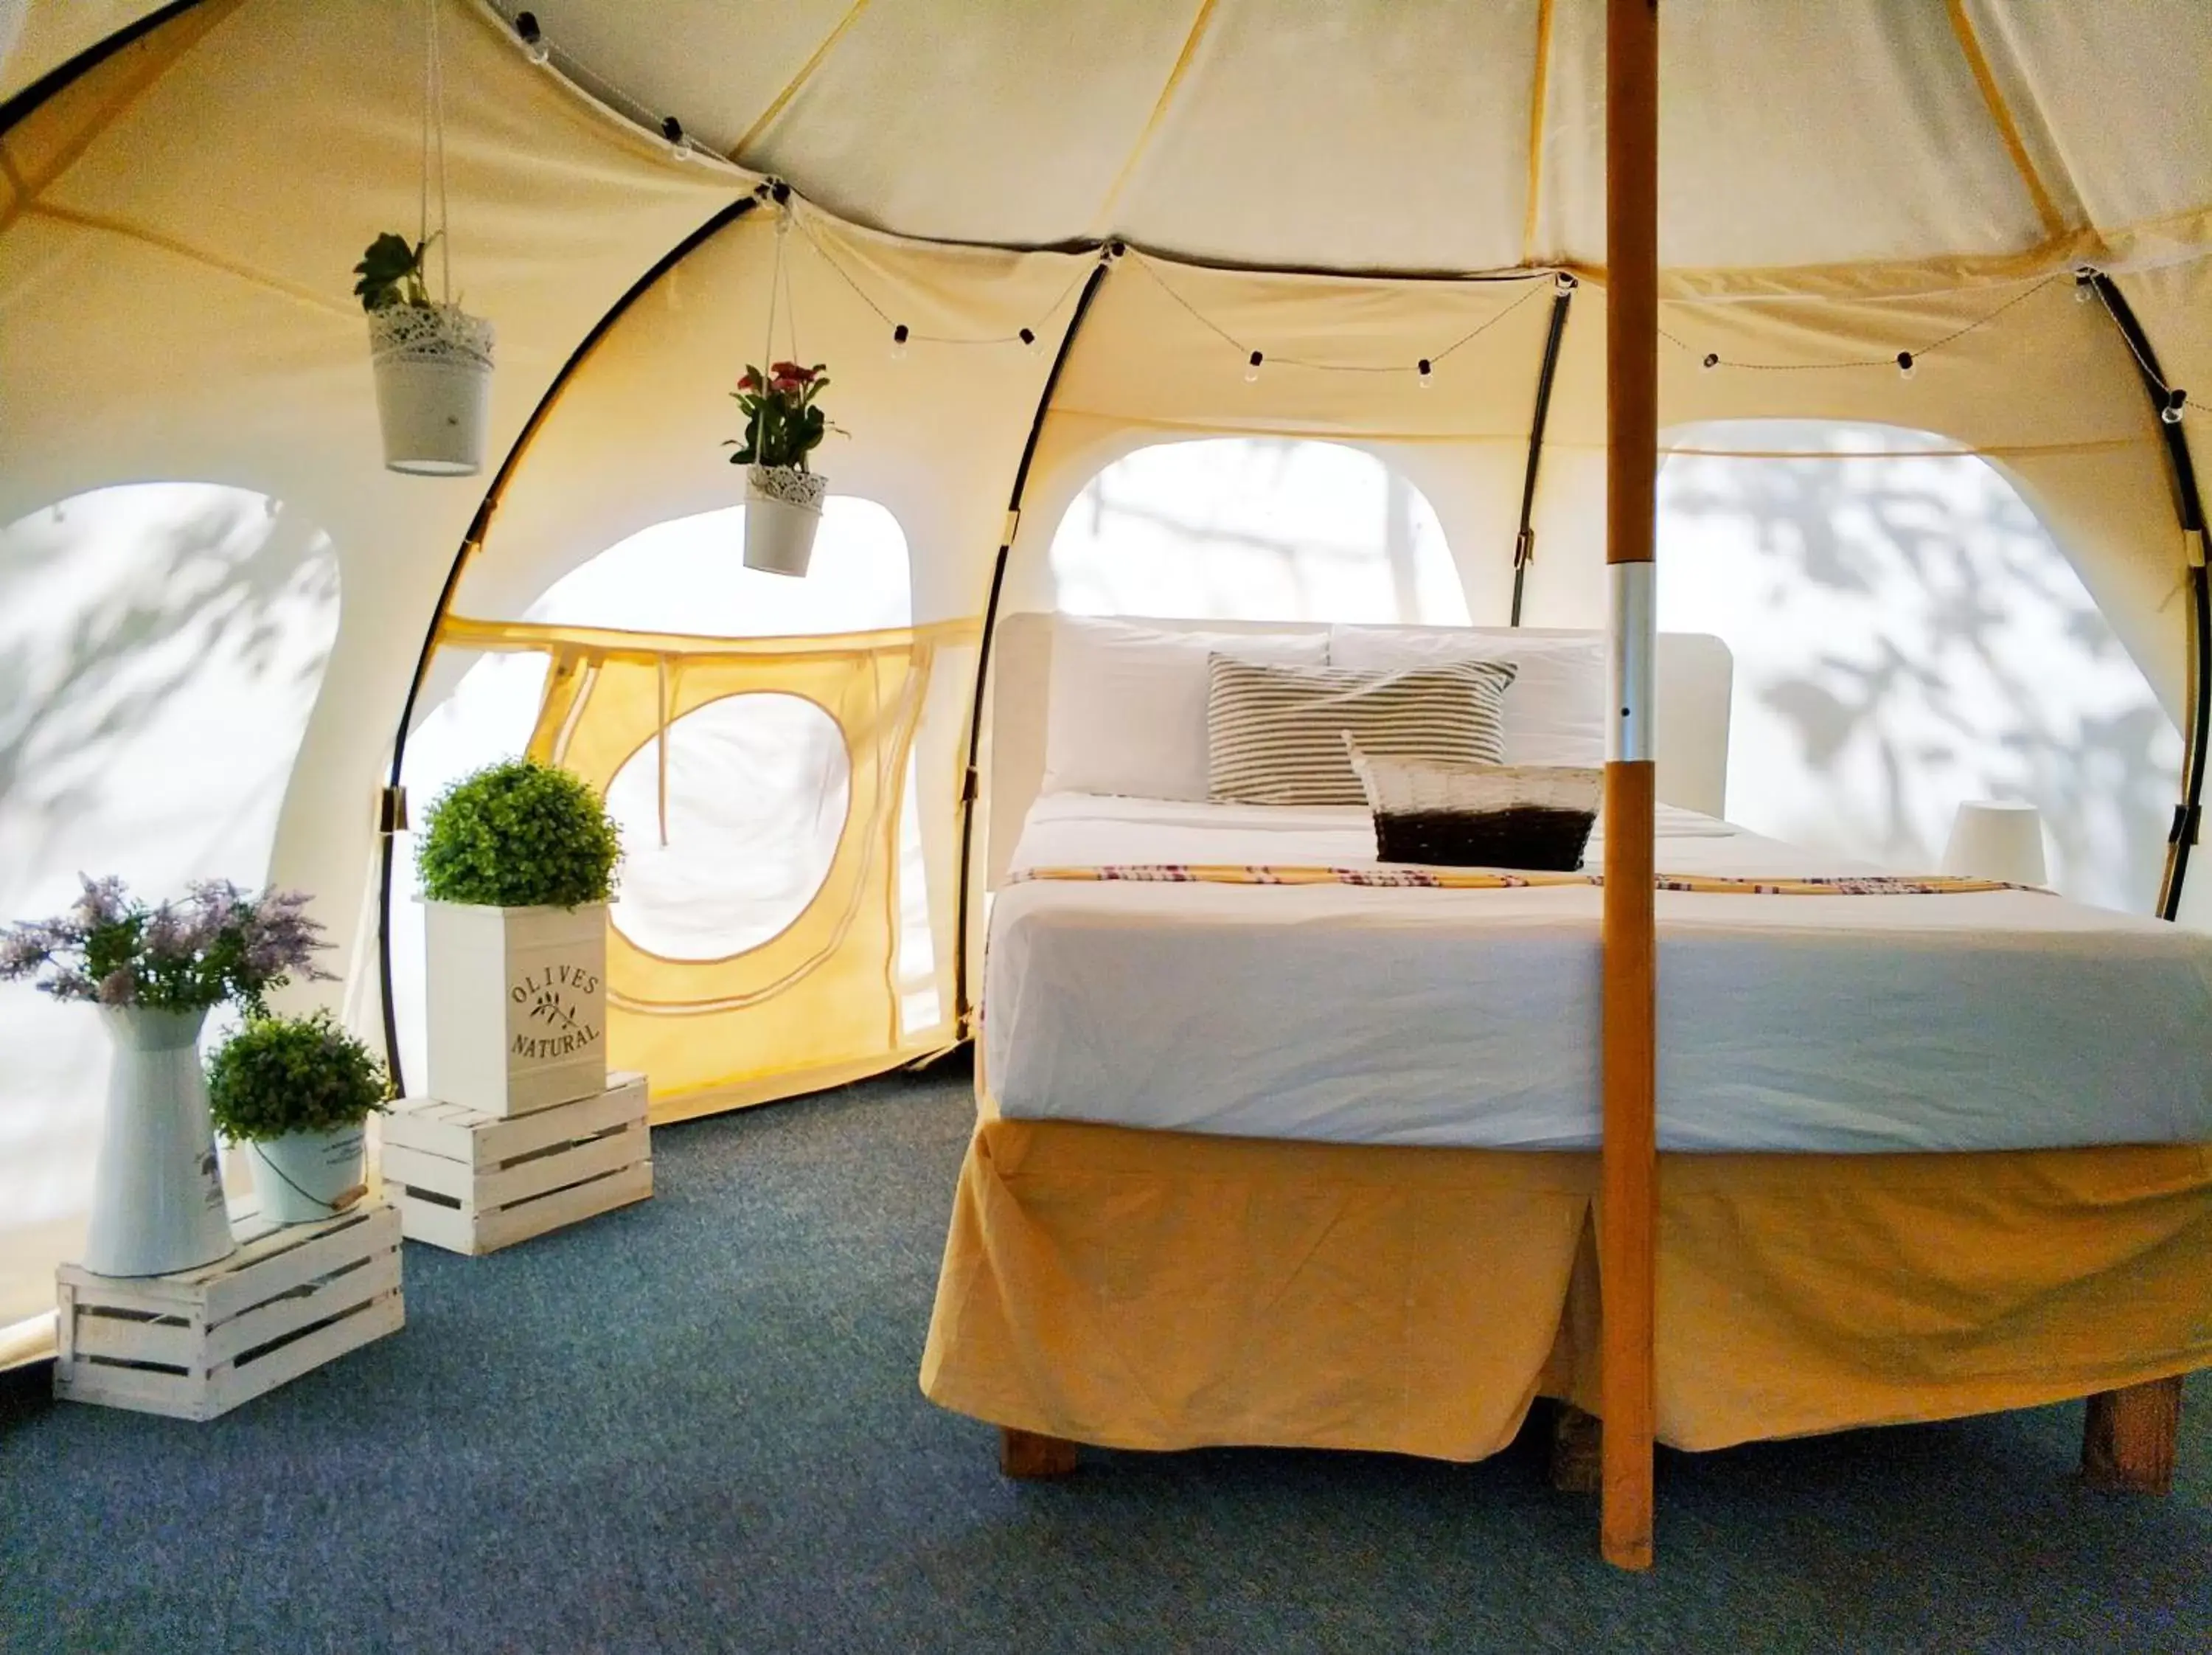 Harmony Glamping Boutique Hotel and Yoga